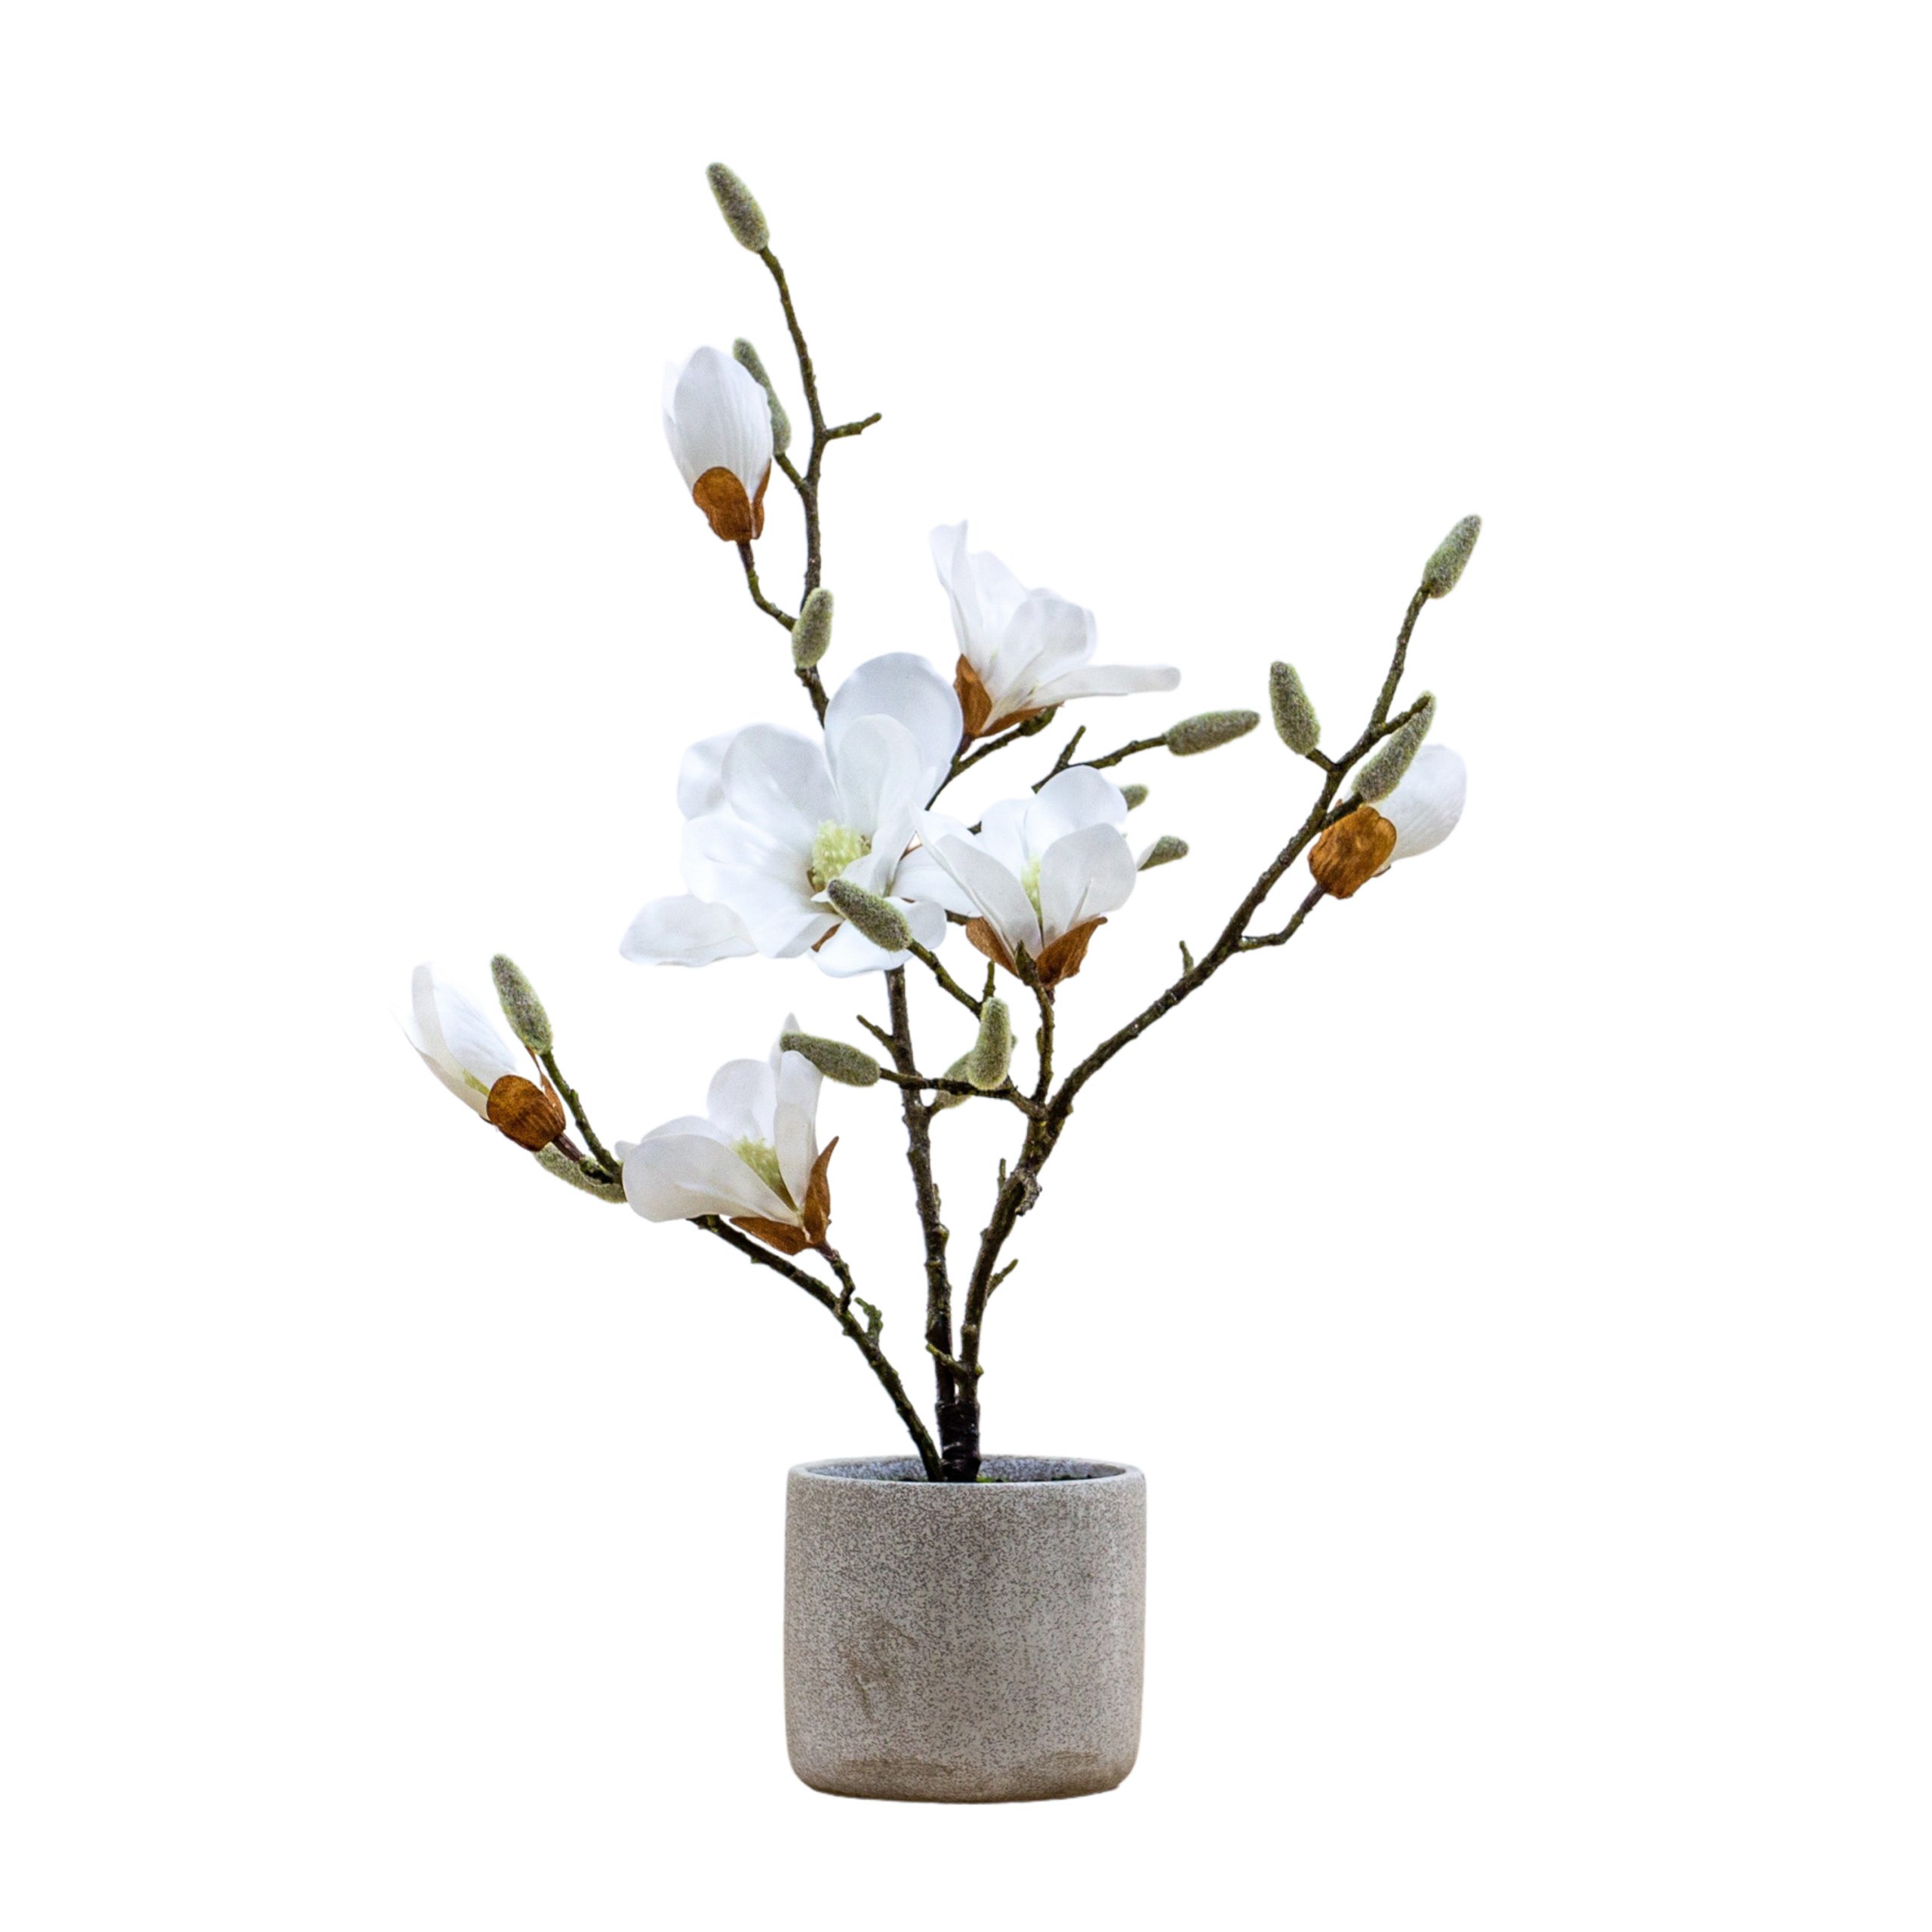 Gallery Direct Potted Magnolia (real touch) White